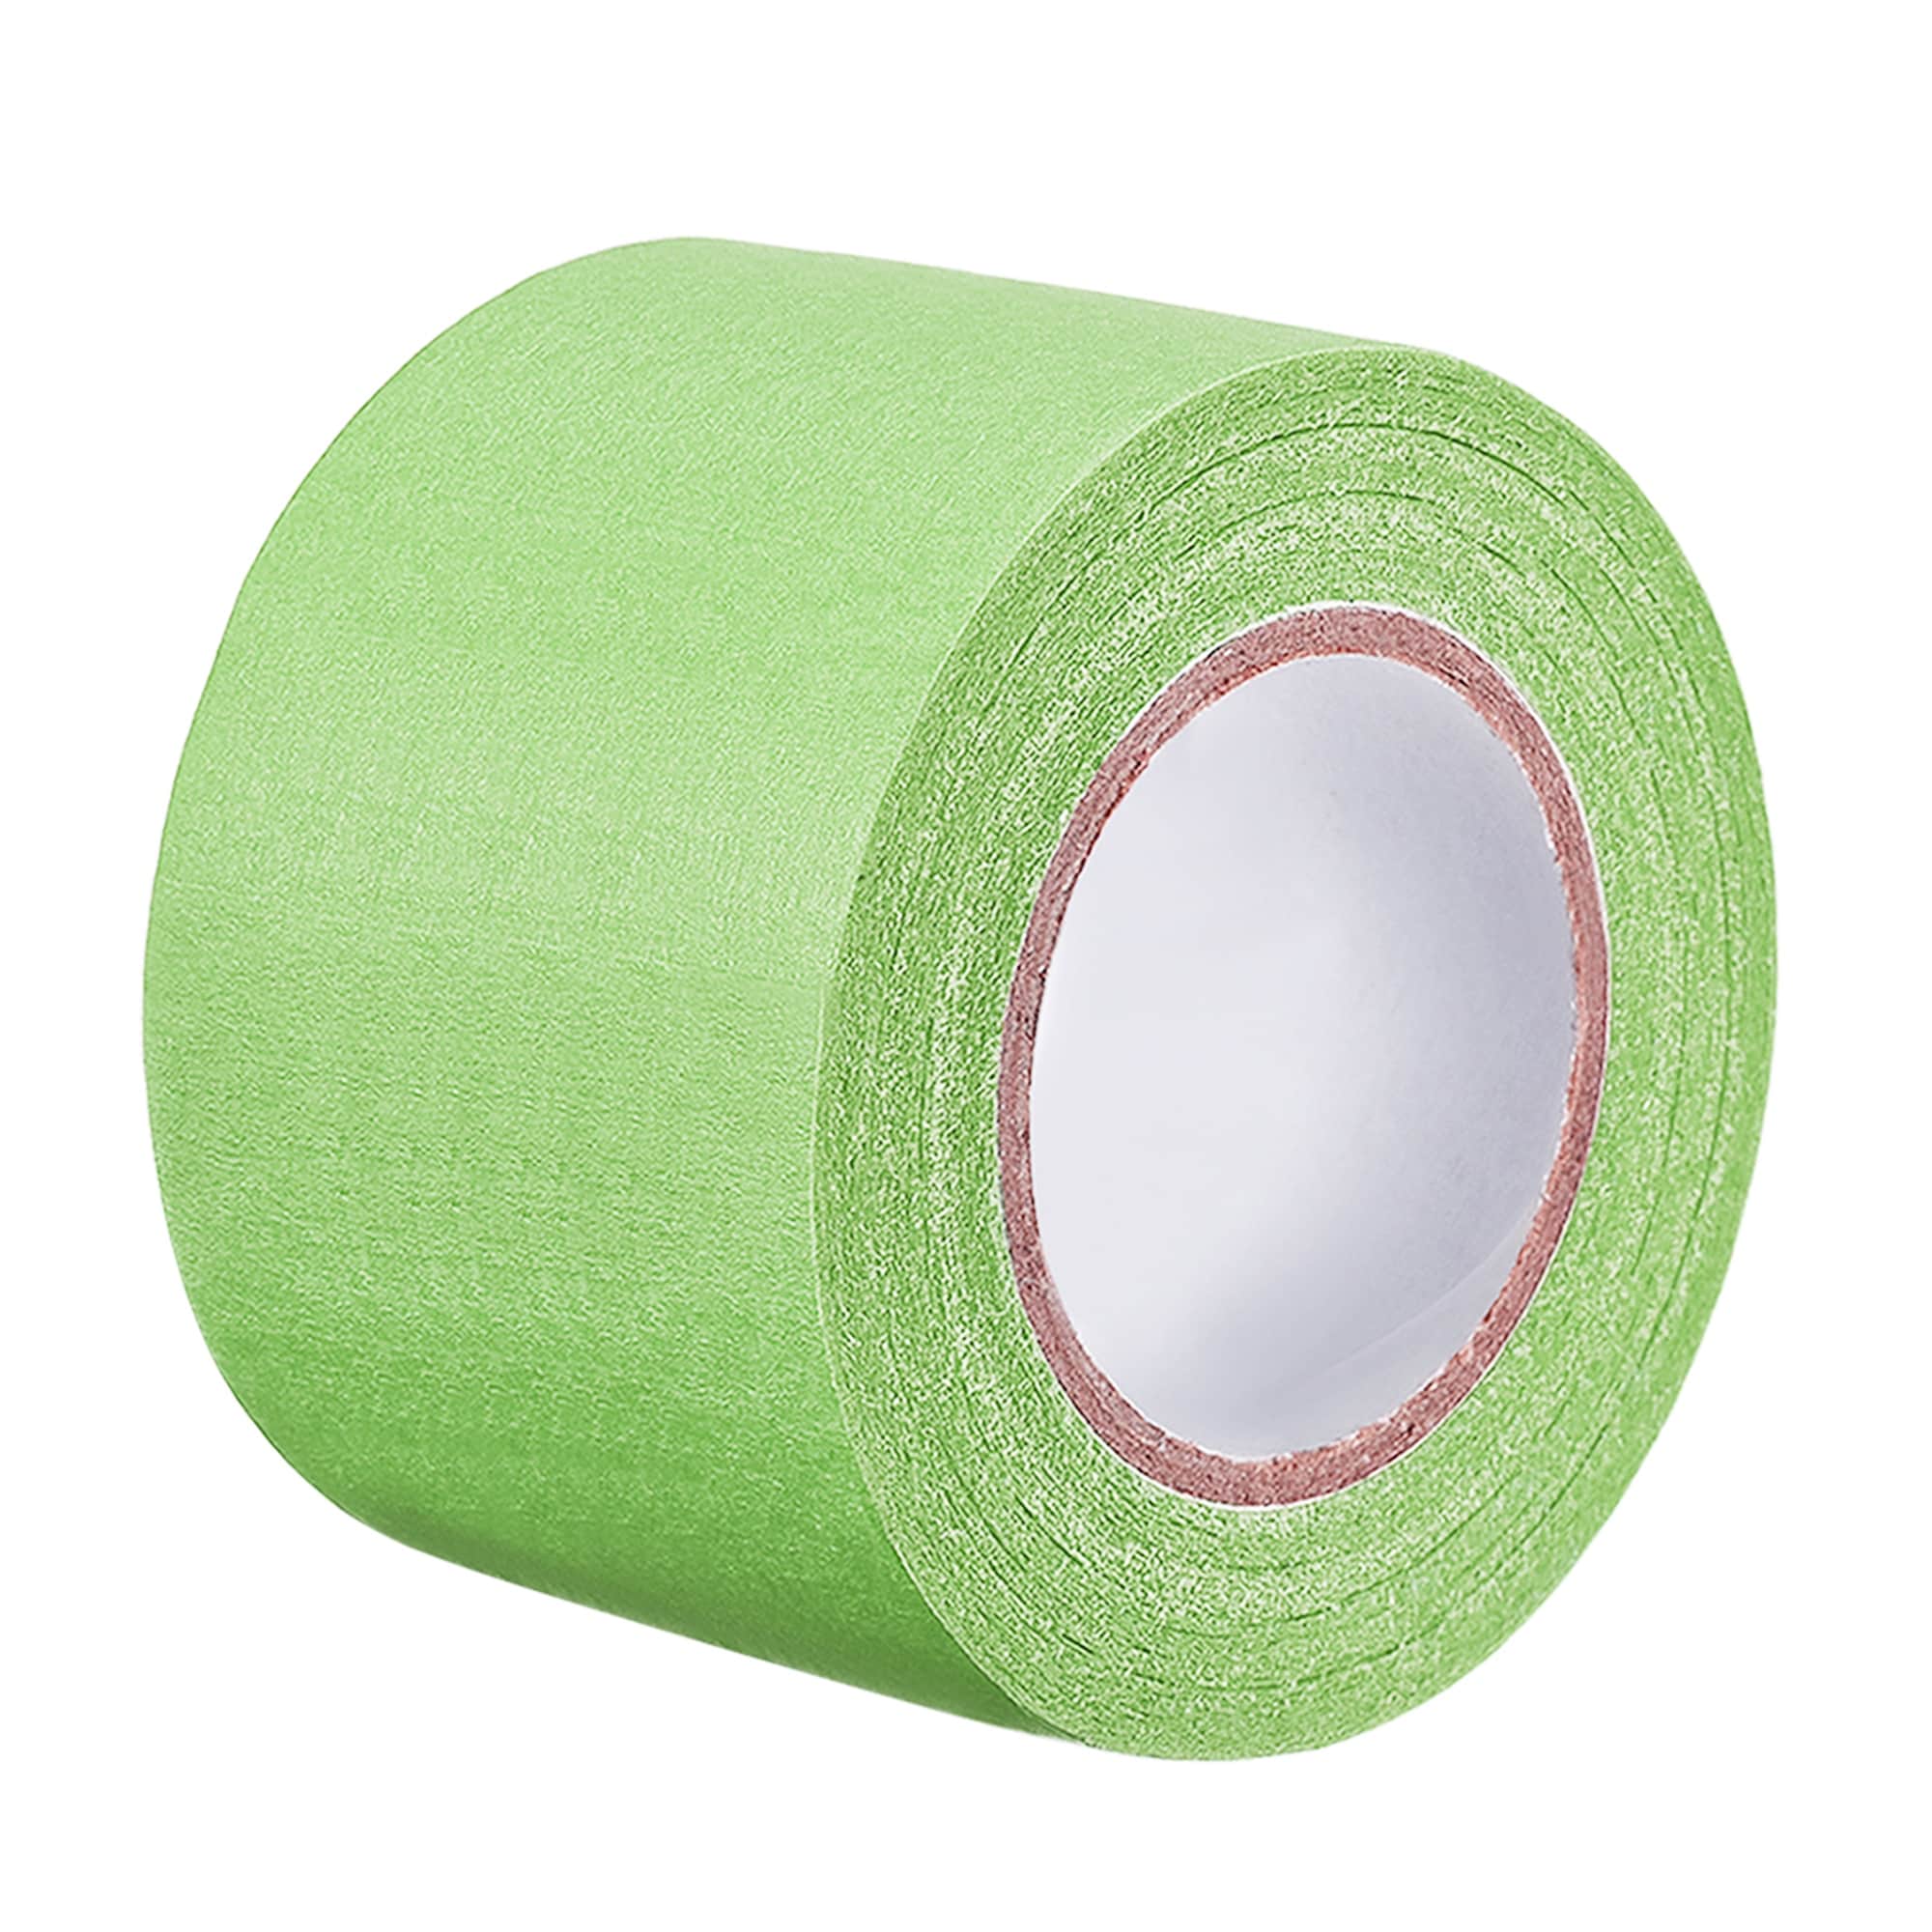 50mm 2 inch Wide 20m 21 Yards Masking Tape Painters Tape Rolls Light Green  - Bed Bath & Beyond - 37332637